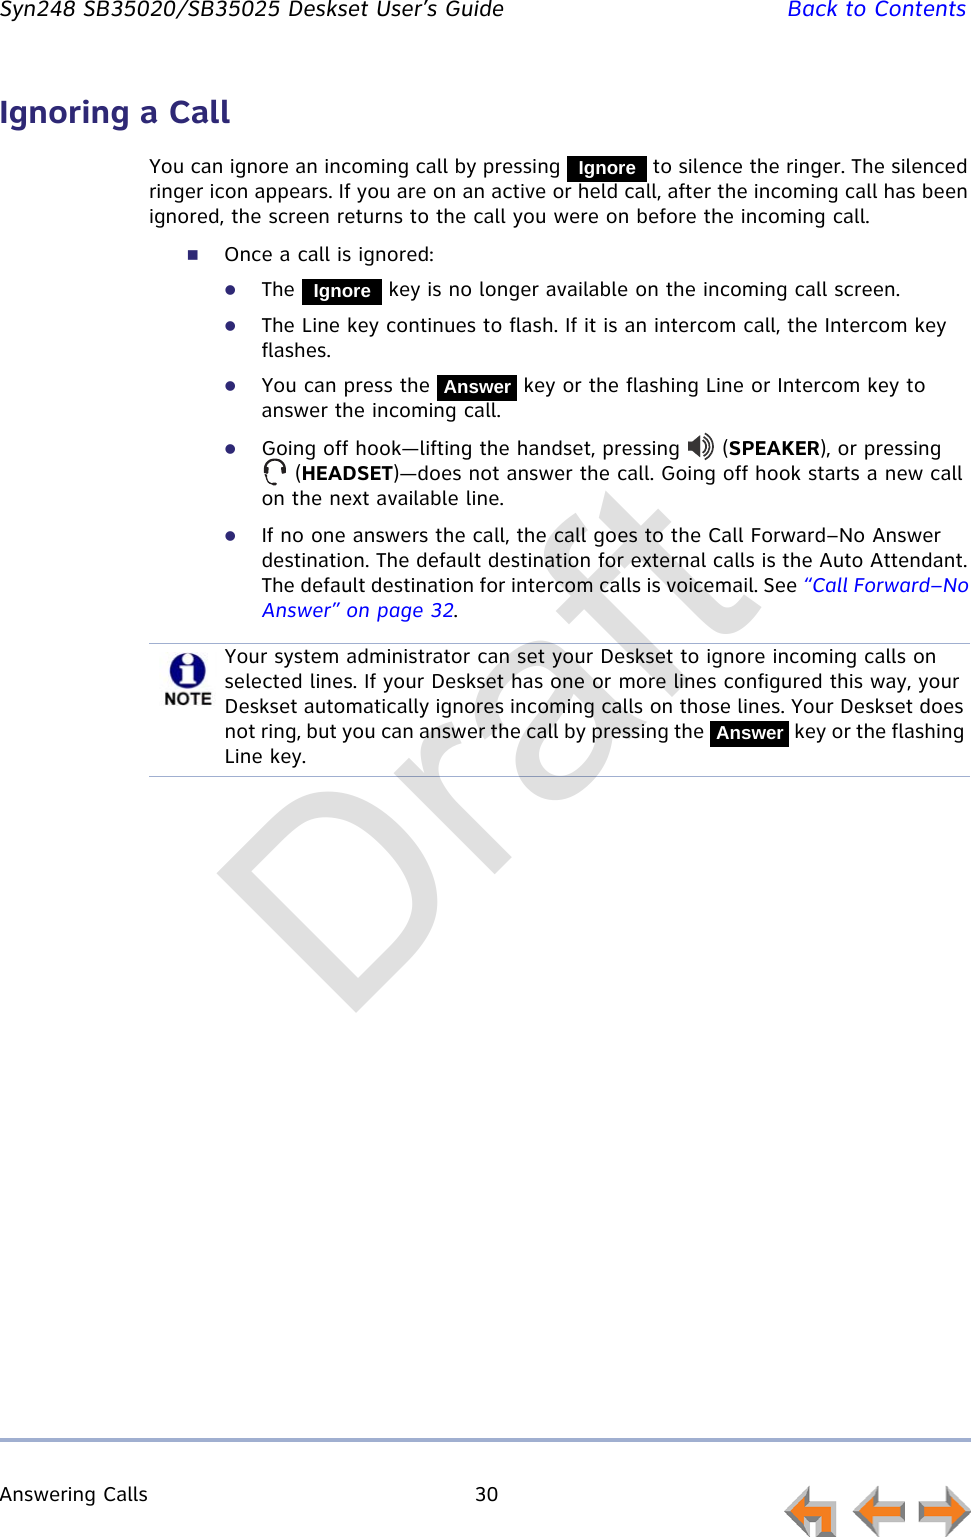 Answering Calls 30         Syn248 SB35020/SB35025 Deskset User’s Guide Back to ContentsIgnoring a CallYou can ignore an incoming call by pressing   to silence the ringer. The silenced ringer icon appears. If you are on an active or held call, after the incoming call has been ignored, the screen returns to the call you were on before the incoming call.Once a call is ignored:The   key is no longer available on the incoming call screen.The Line key continues to flash. If it is an intercom call, the Intercom key flashes.You can press the   key or the flashing Line or Intercom key to answer the incoming call.Going off hook—lifting the handset, pressing   (SPEAKER), or pressing  (HEADSET)—does not answer the call. Going off hook starts a new call on the next available line.If no one answers the call, the call goes to the Call Forward–No Answer destination. The default destination for external calls is the Auto Attendant. The default destination for intercom calls is voicemail. See “Call Forward–No Answer” on page 32.IgnoreIgnoreAnswerYour system administrator can set your Deskset to ignore incoming calls on selected lines. If your Deskset has one or more lines configured this way, your Deskset automatically ignores incoming calls on those lines. Your Deskset does not ring, but you can answer the call by pressing the   key or the flashing Line key.AnswerDraft